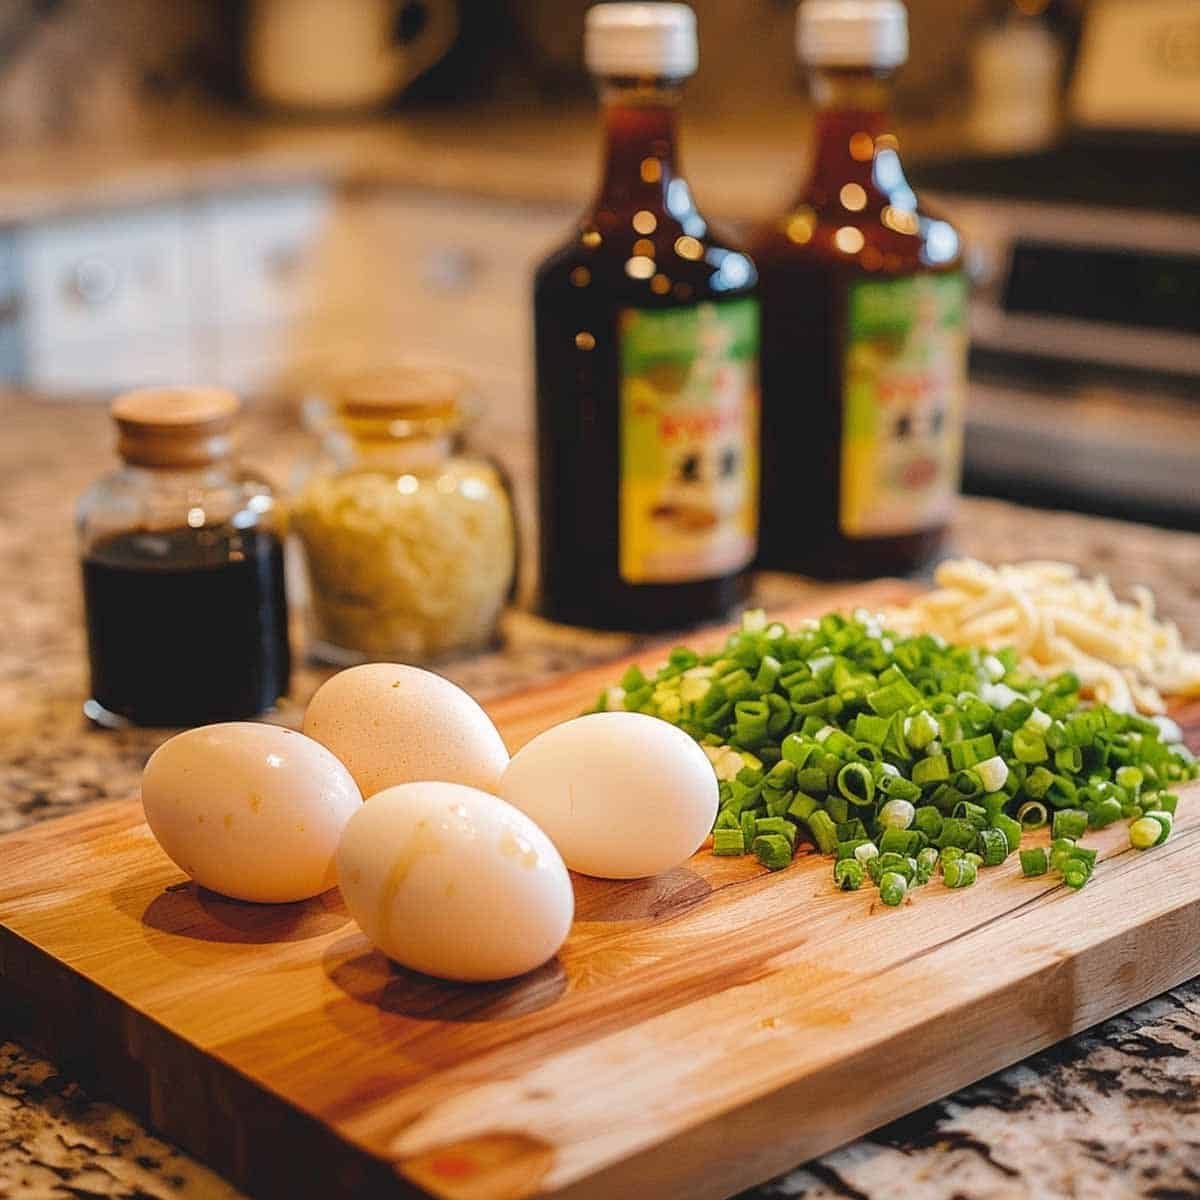 Eggs and spring onions on a cutting board